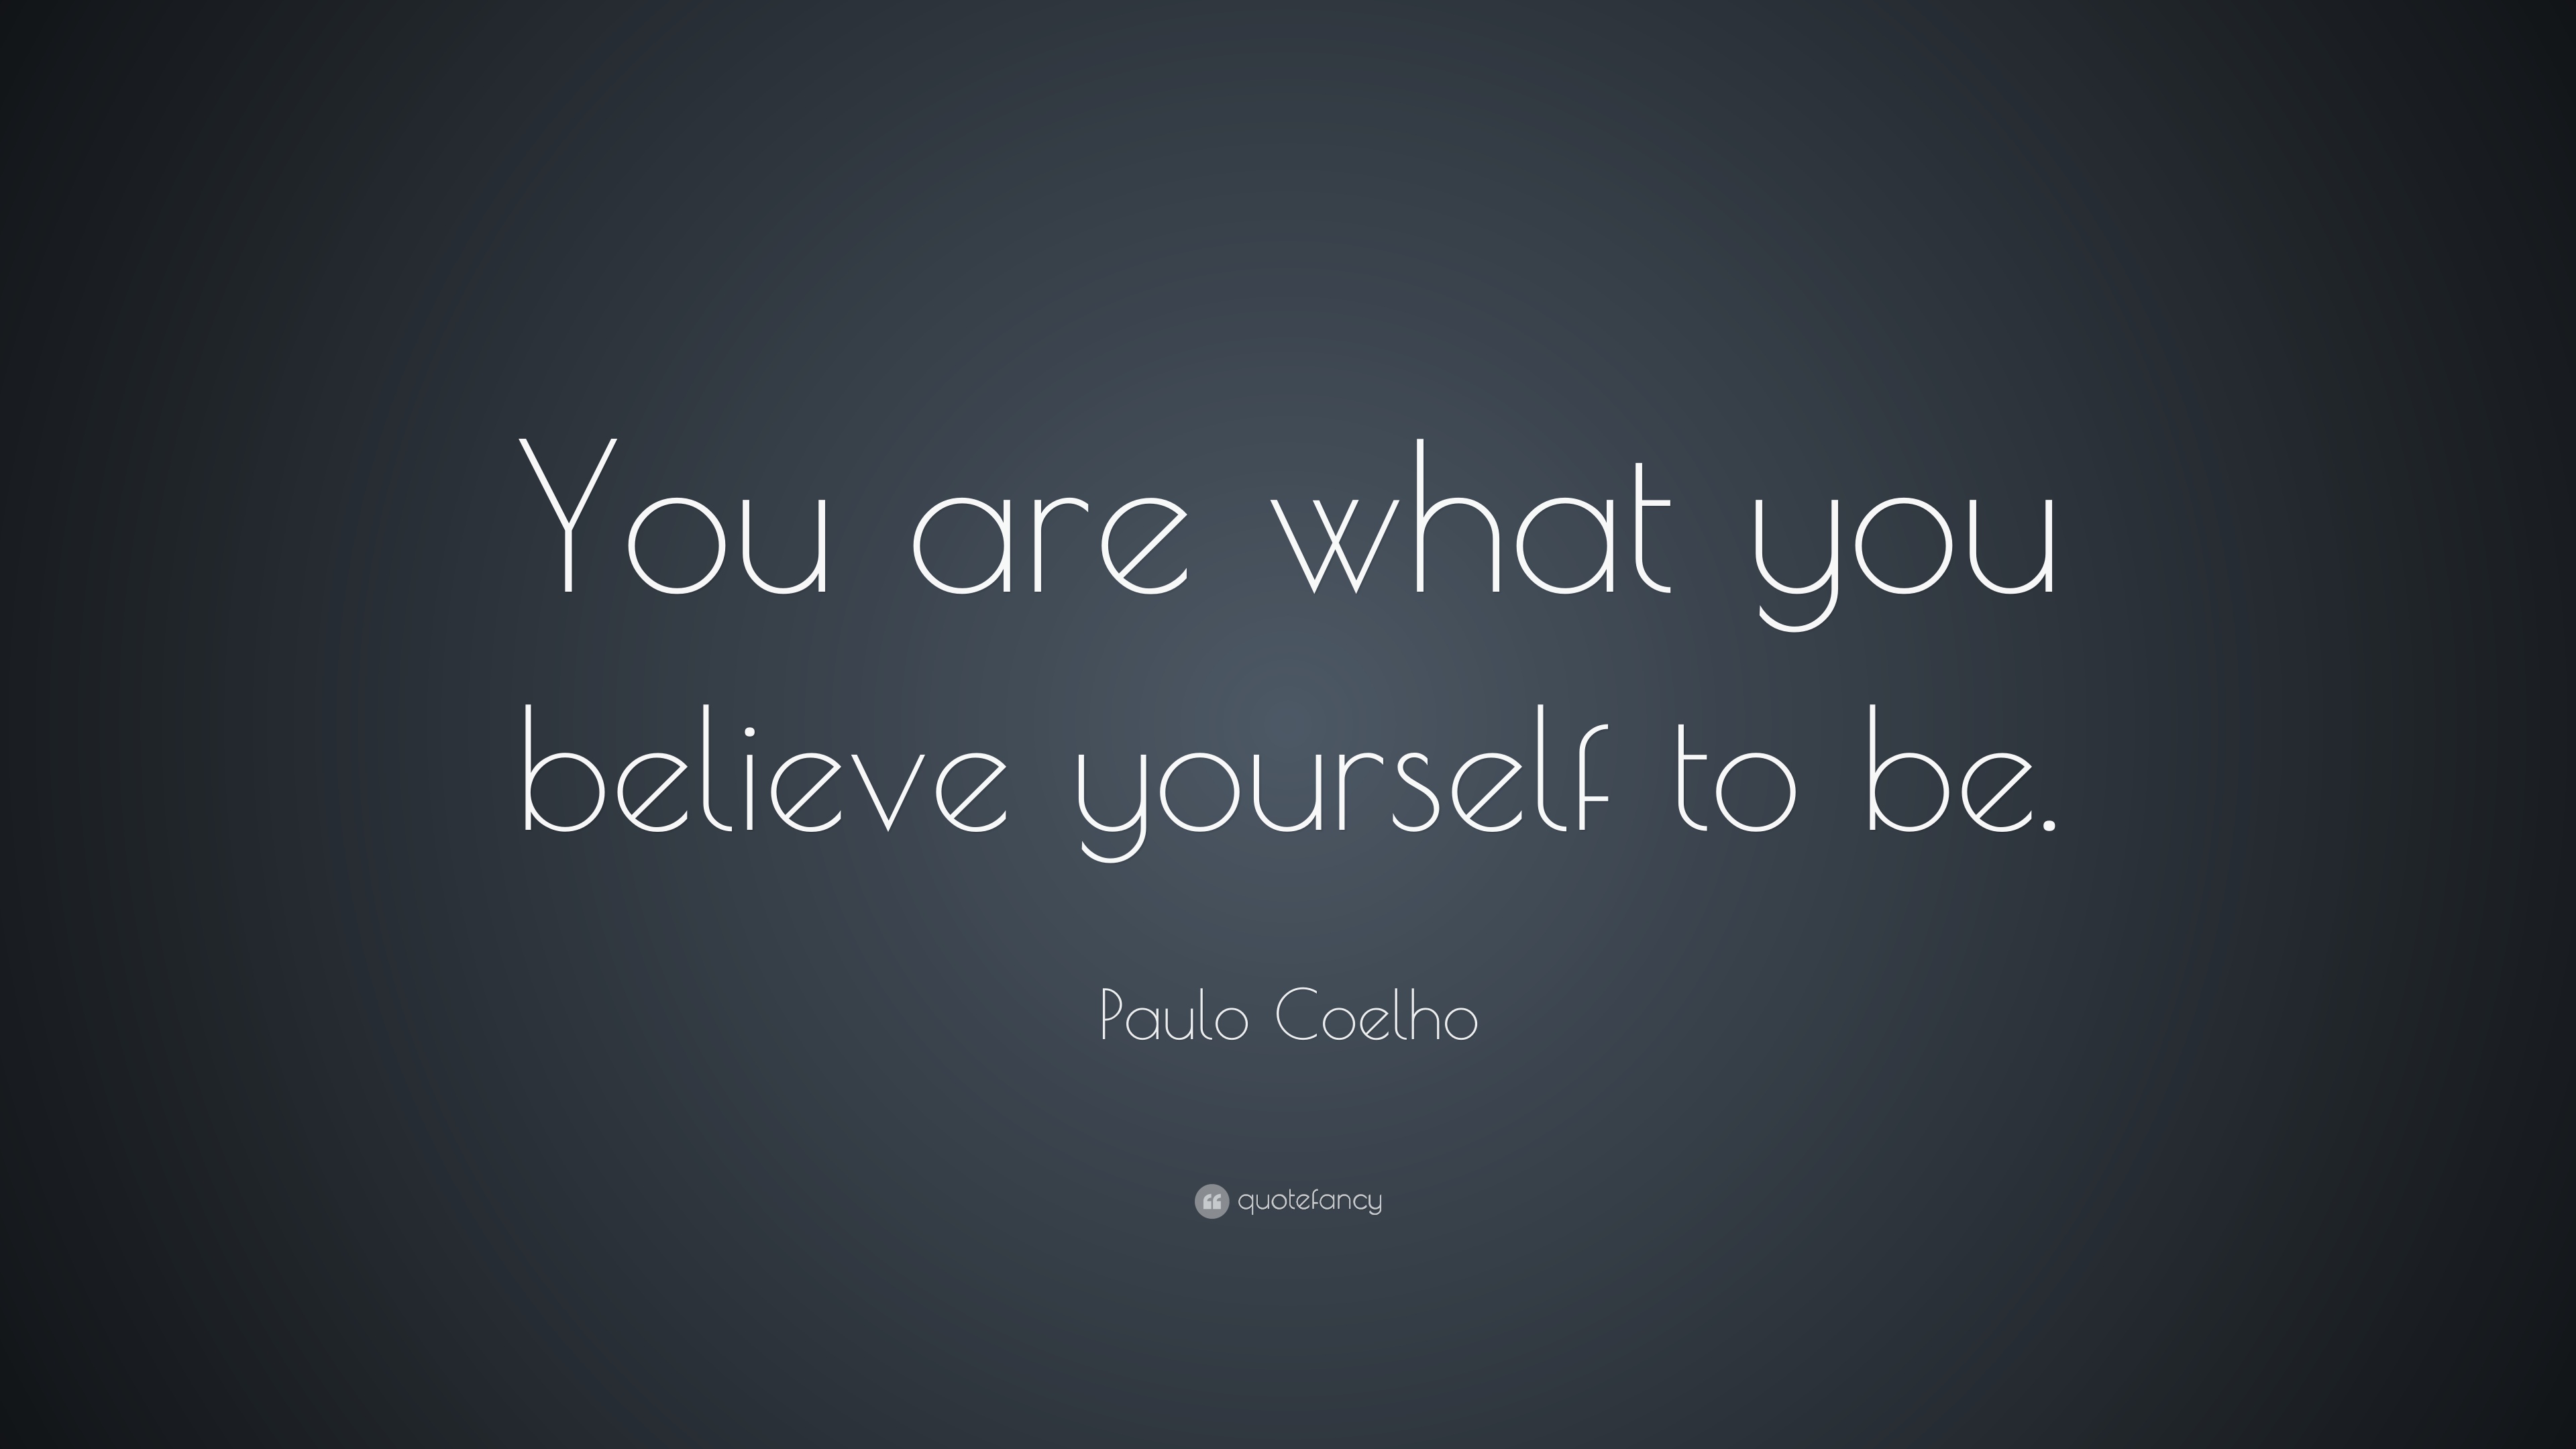 Paulo coelho quote âyou are what you believe yourself to beâ